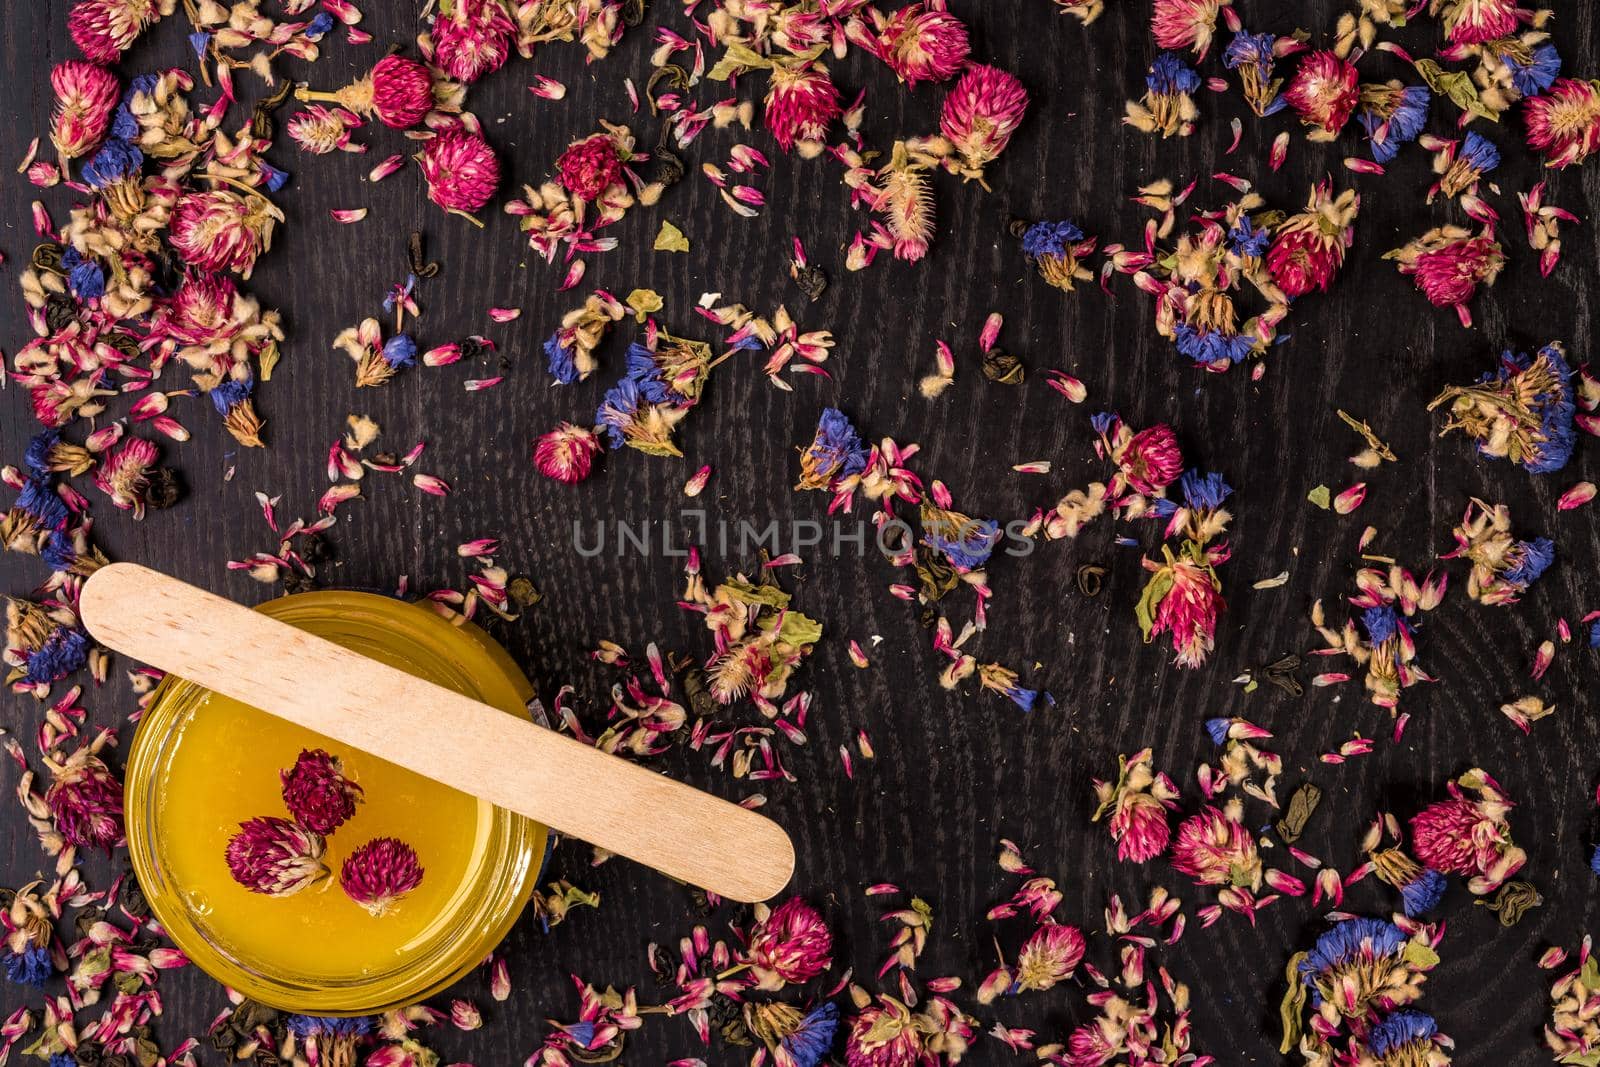 Organic honey in a small jar on a wooden background. Dried flowers. Still life. Top view. Copy space